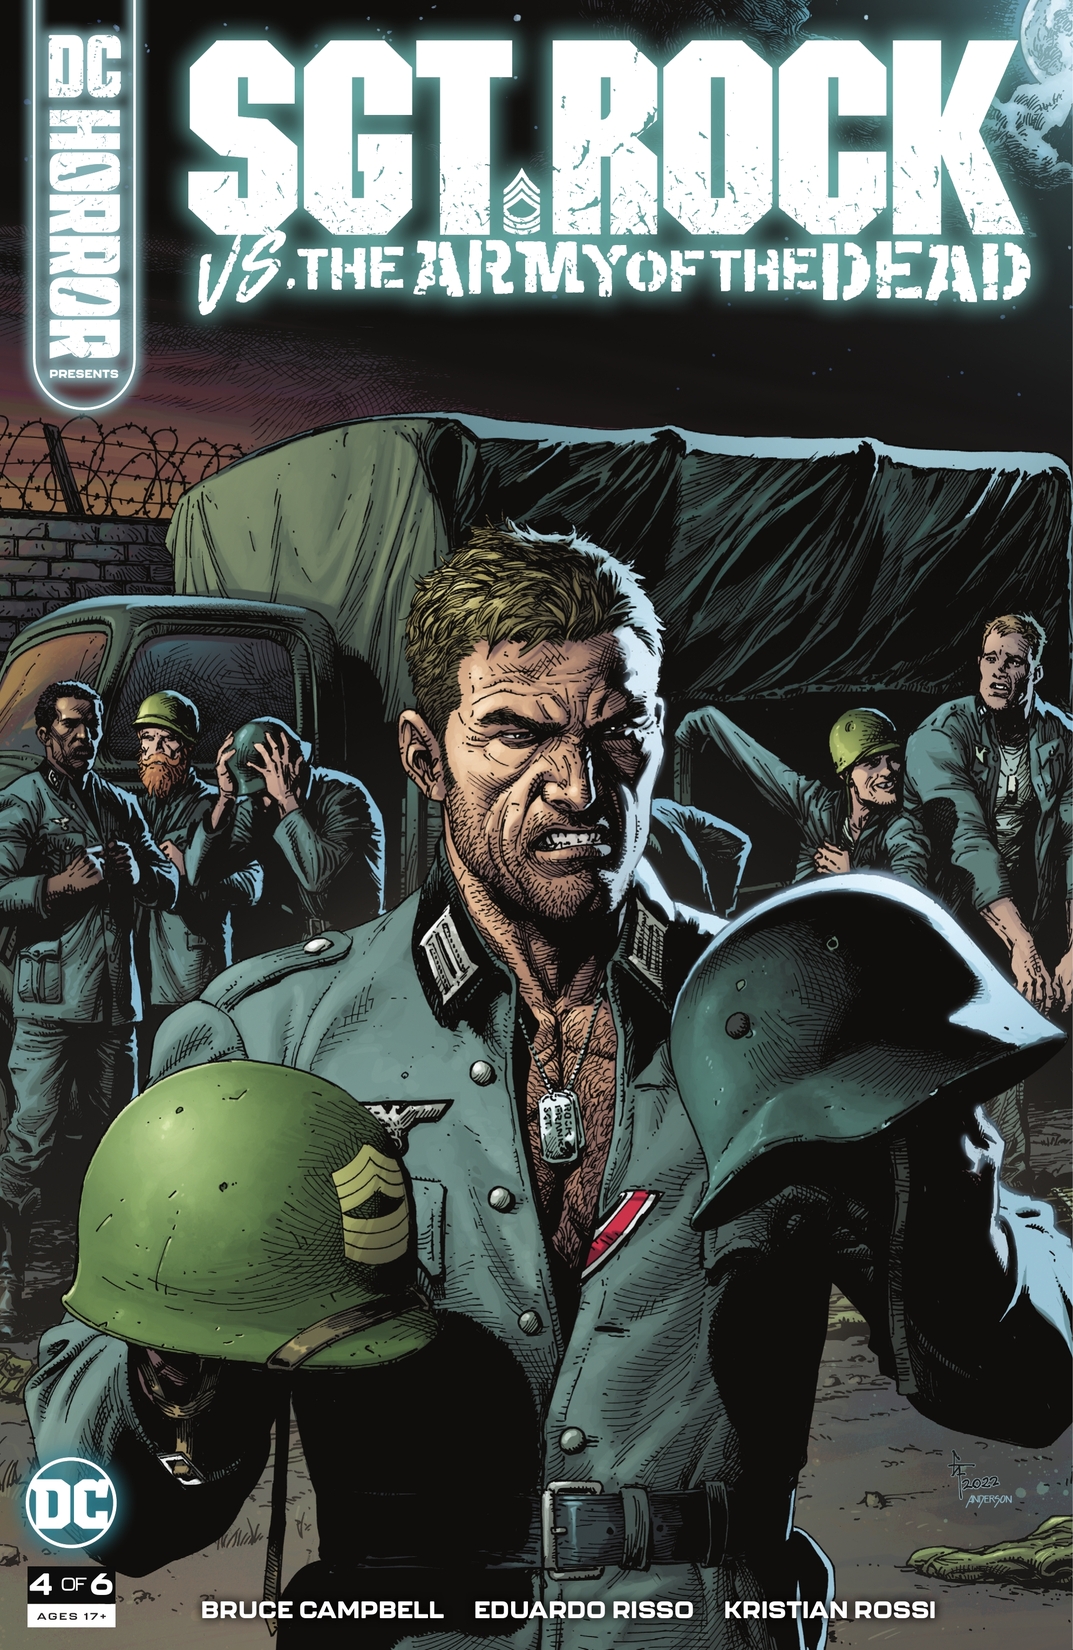 DC Horror Presents: Sgt. Rock vs. The Army of the Dead #4 preview images